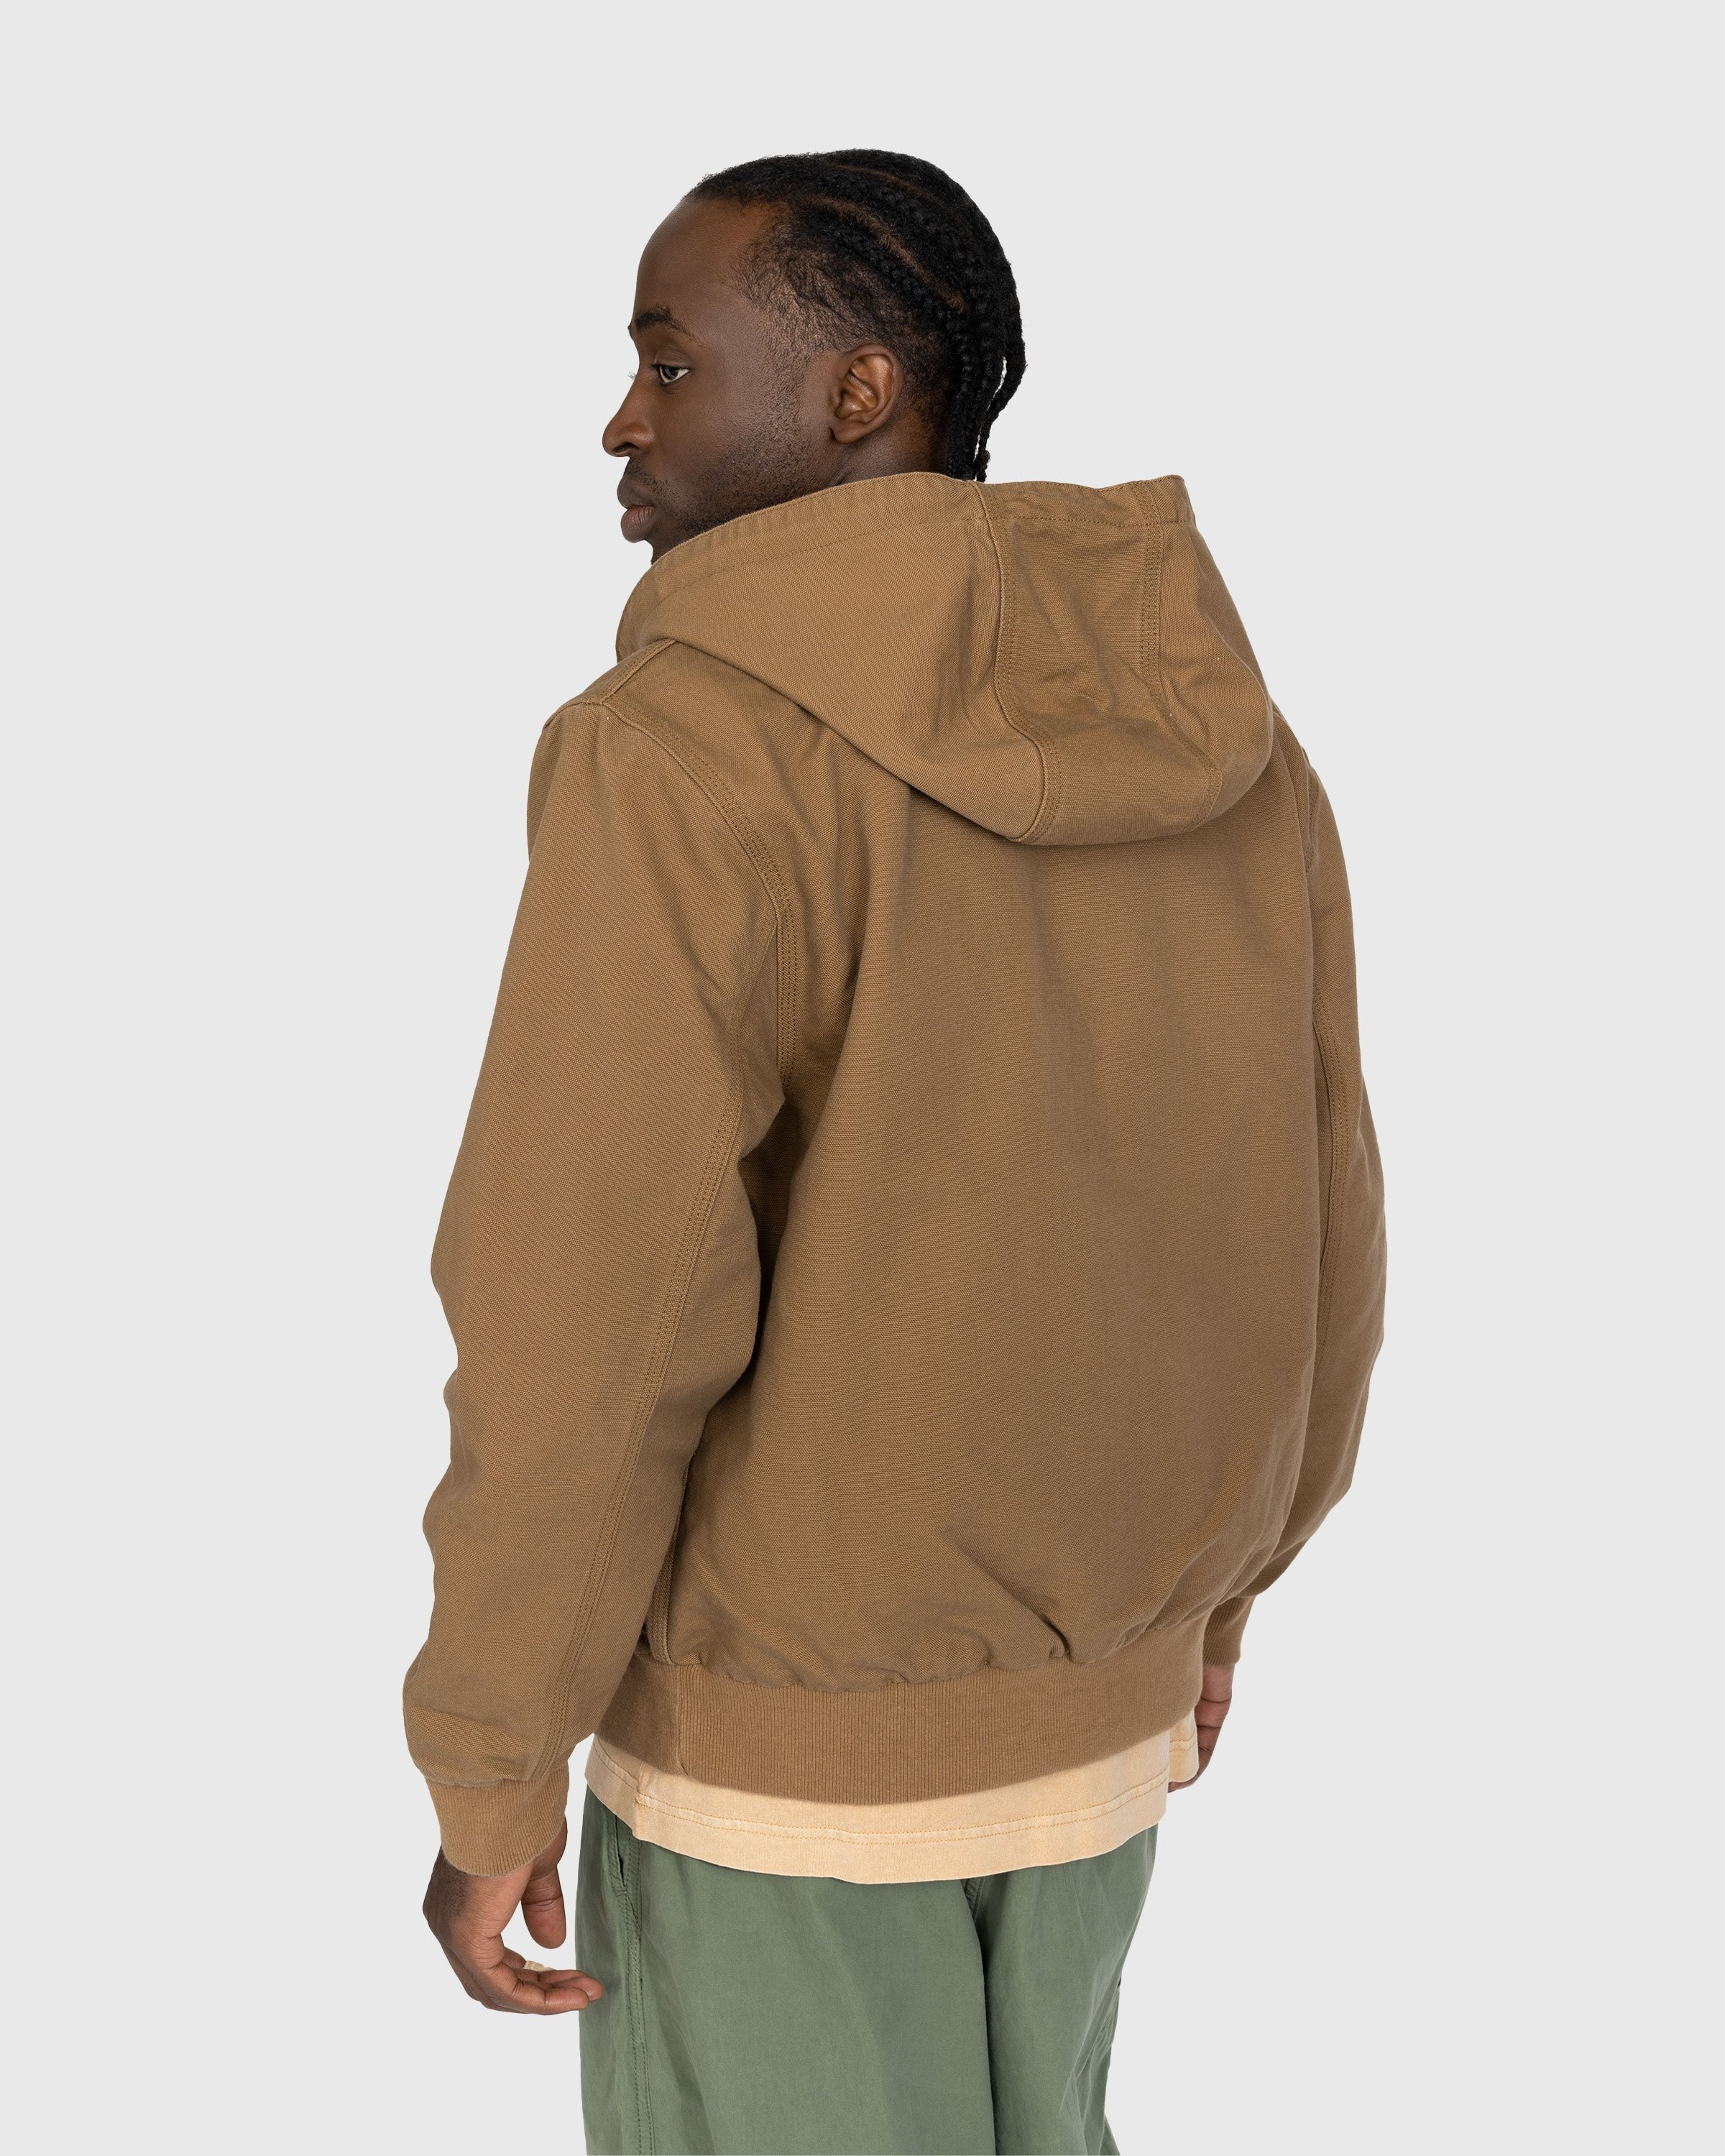 Carhartt WIP – Active Jacket Brown - Outerwear - Brown - Image 3